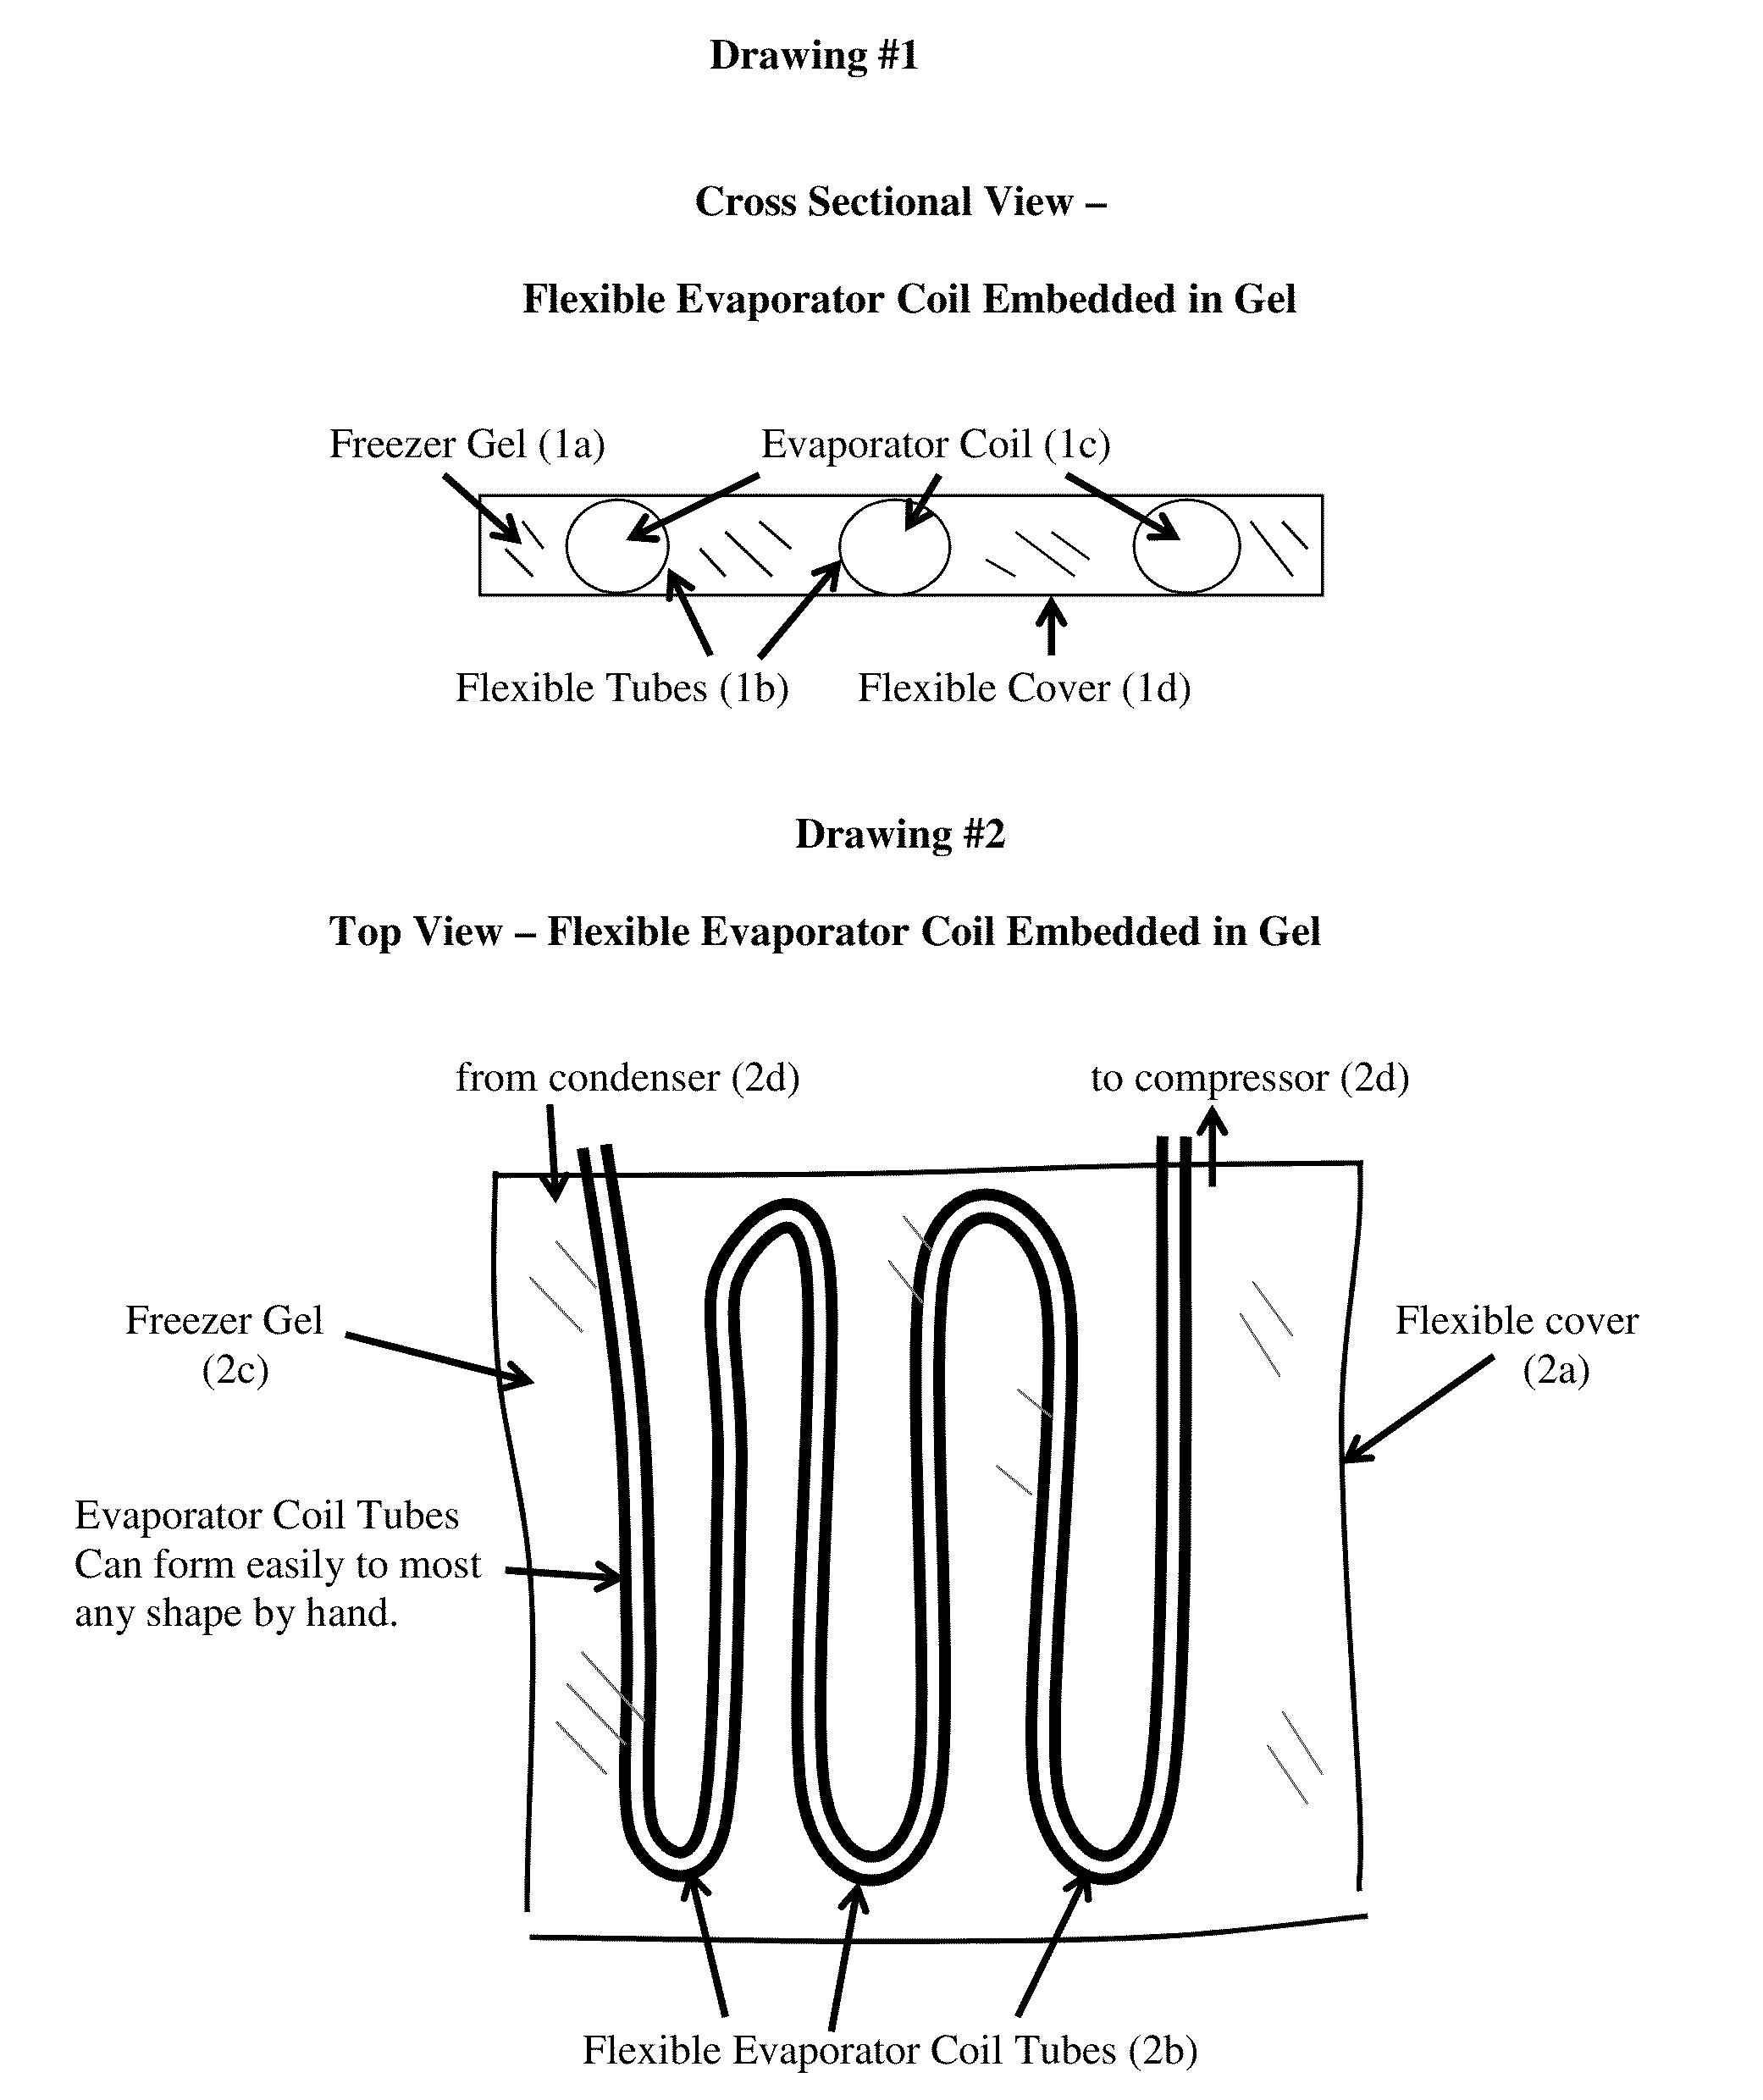 Flexible Evaporator Coil For Application of Cold Directly to Unevenly Shaped Objects (formerly Refrigerated Head Gear for Super Cold Therapy)